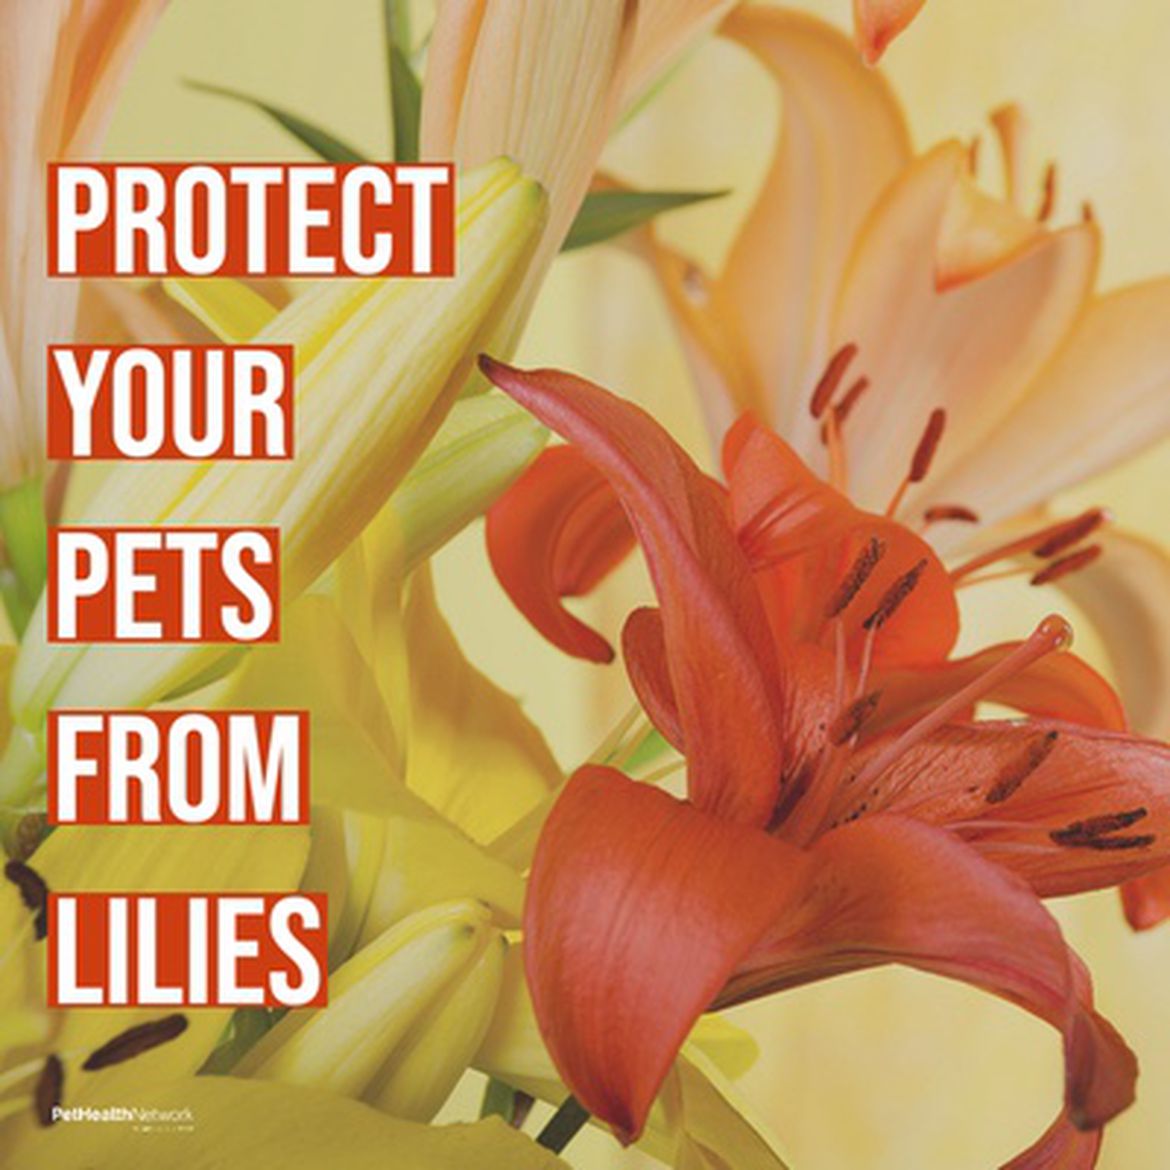 Social media post about the toxicity of Easter lilies for pets.